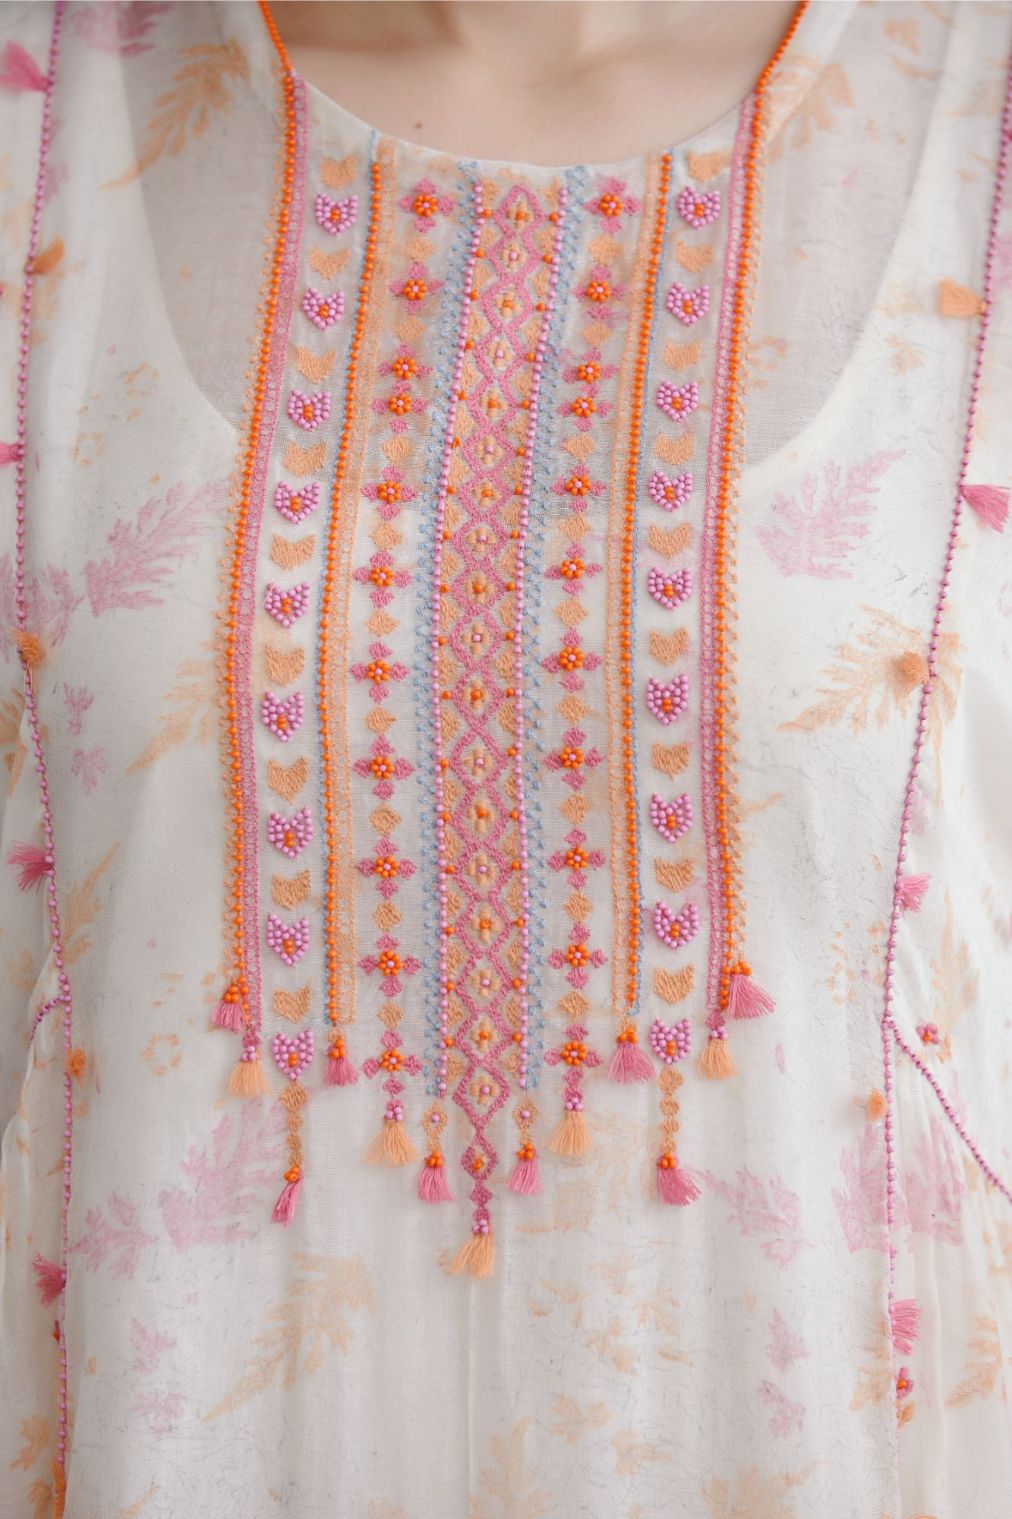 Hand block printed cotton Chanderi kurta set with cotton slip inside, highlighted with all-over pink and orange beads and thread embroidery